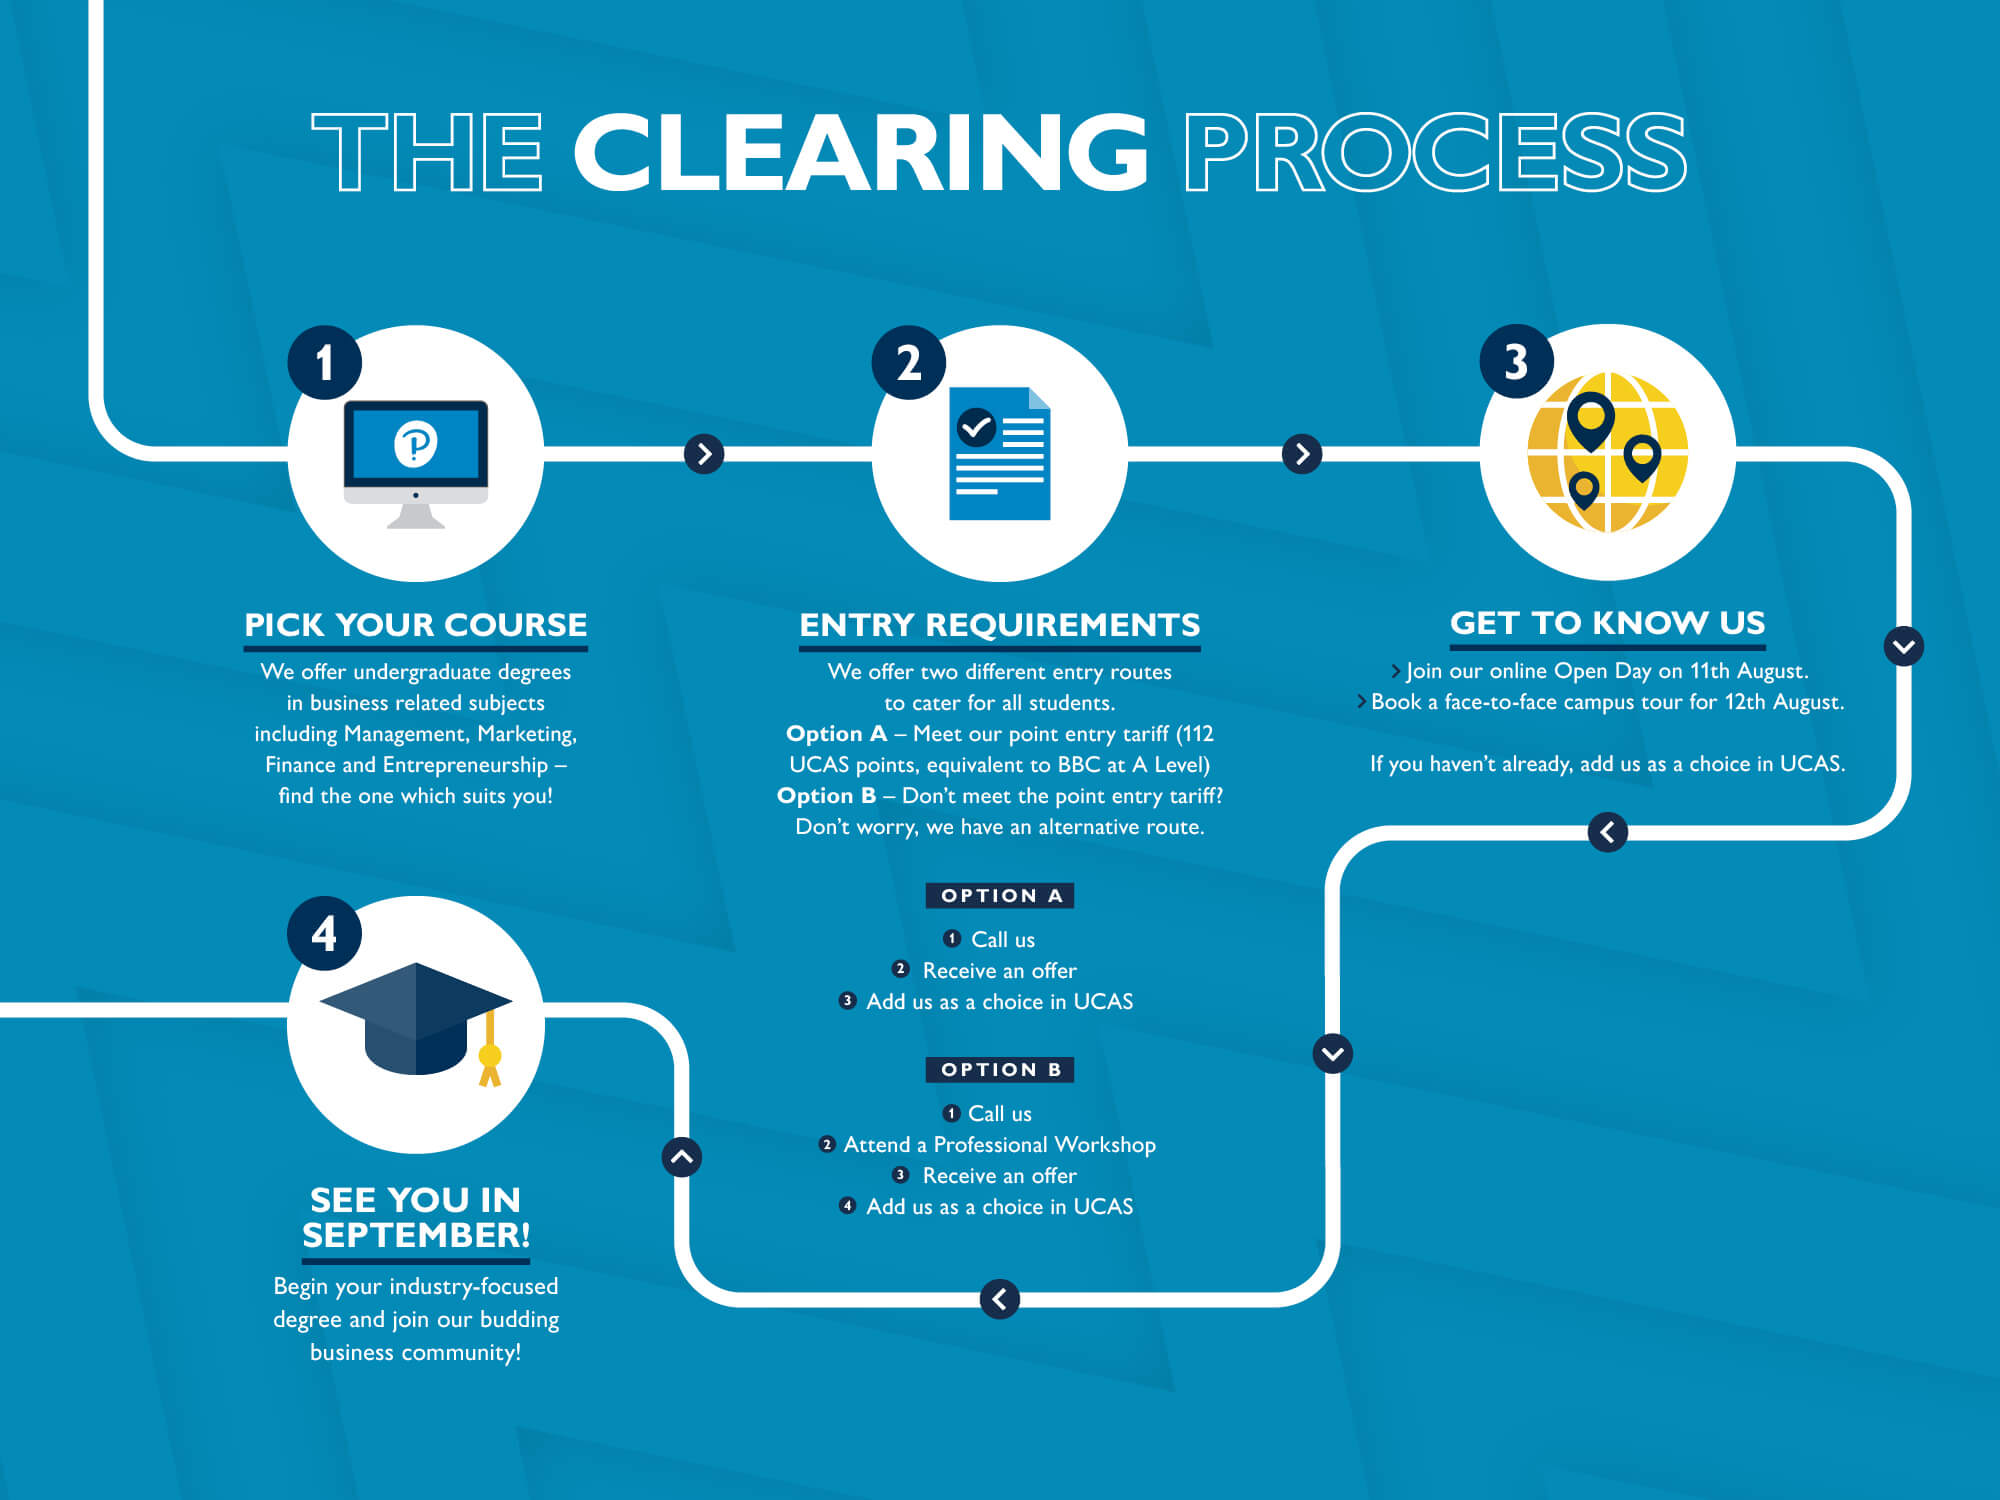 Infographic of the Clearing process for Pearson Business School